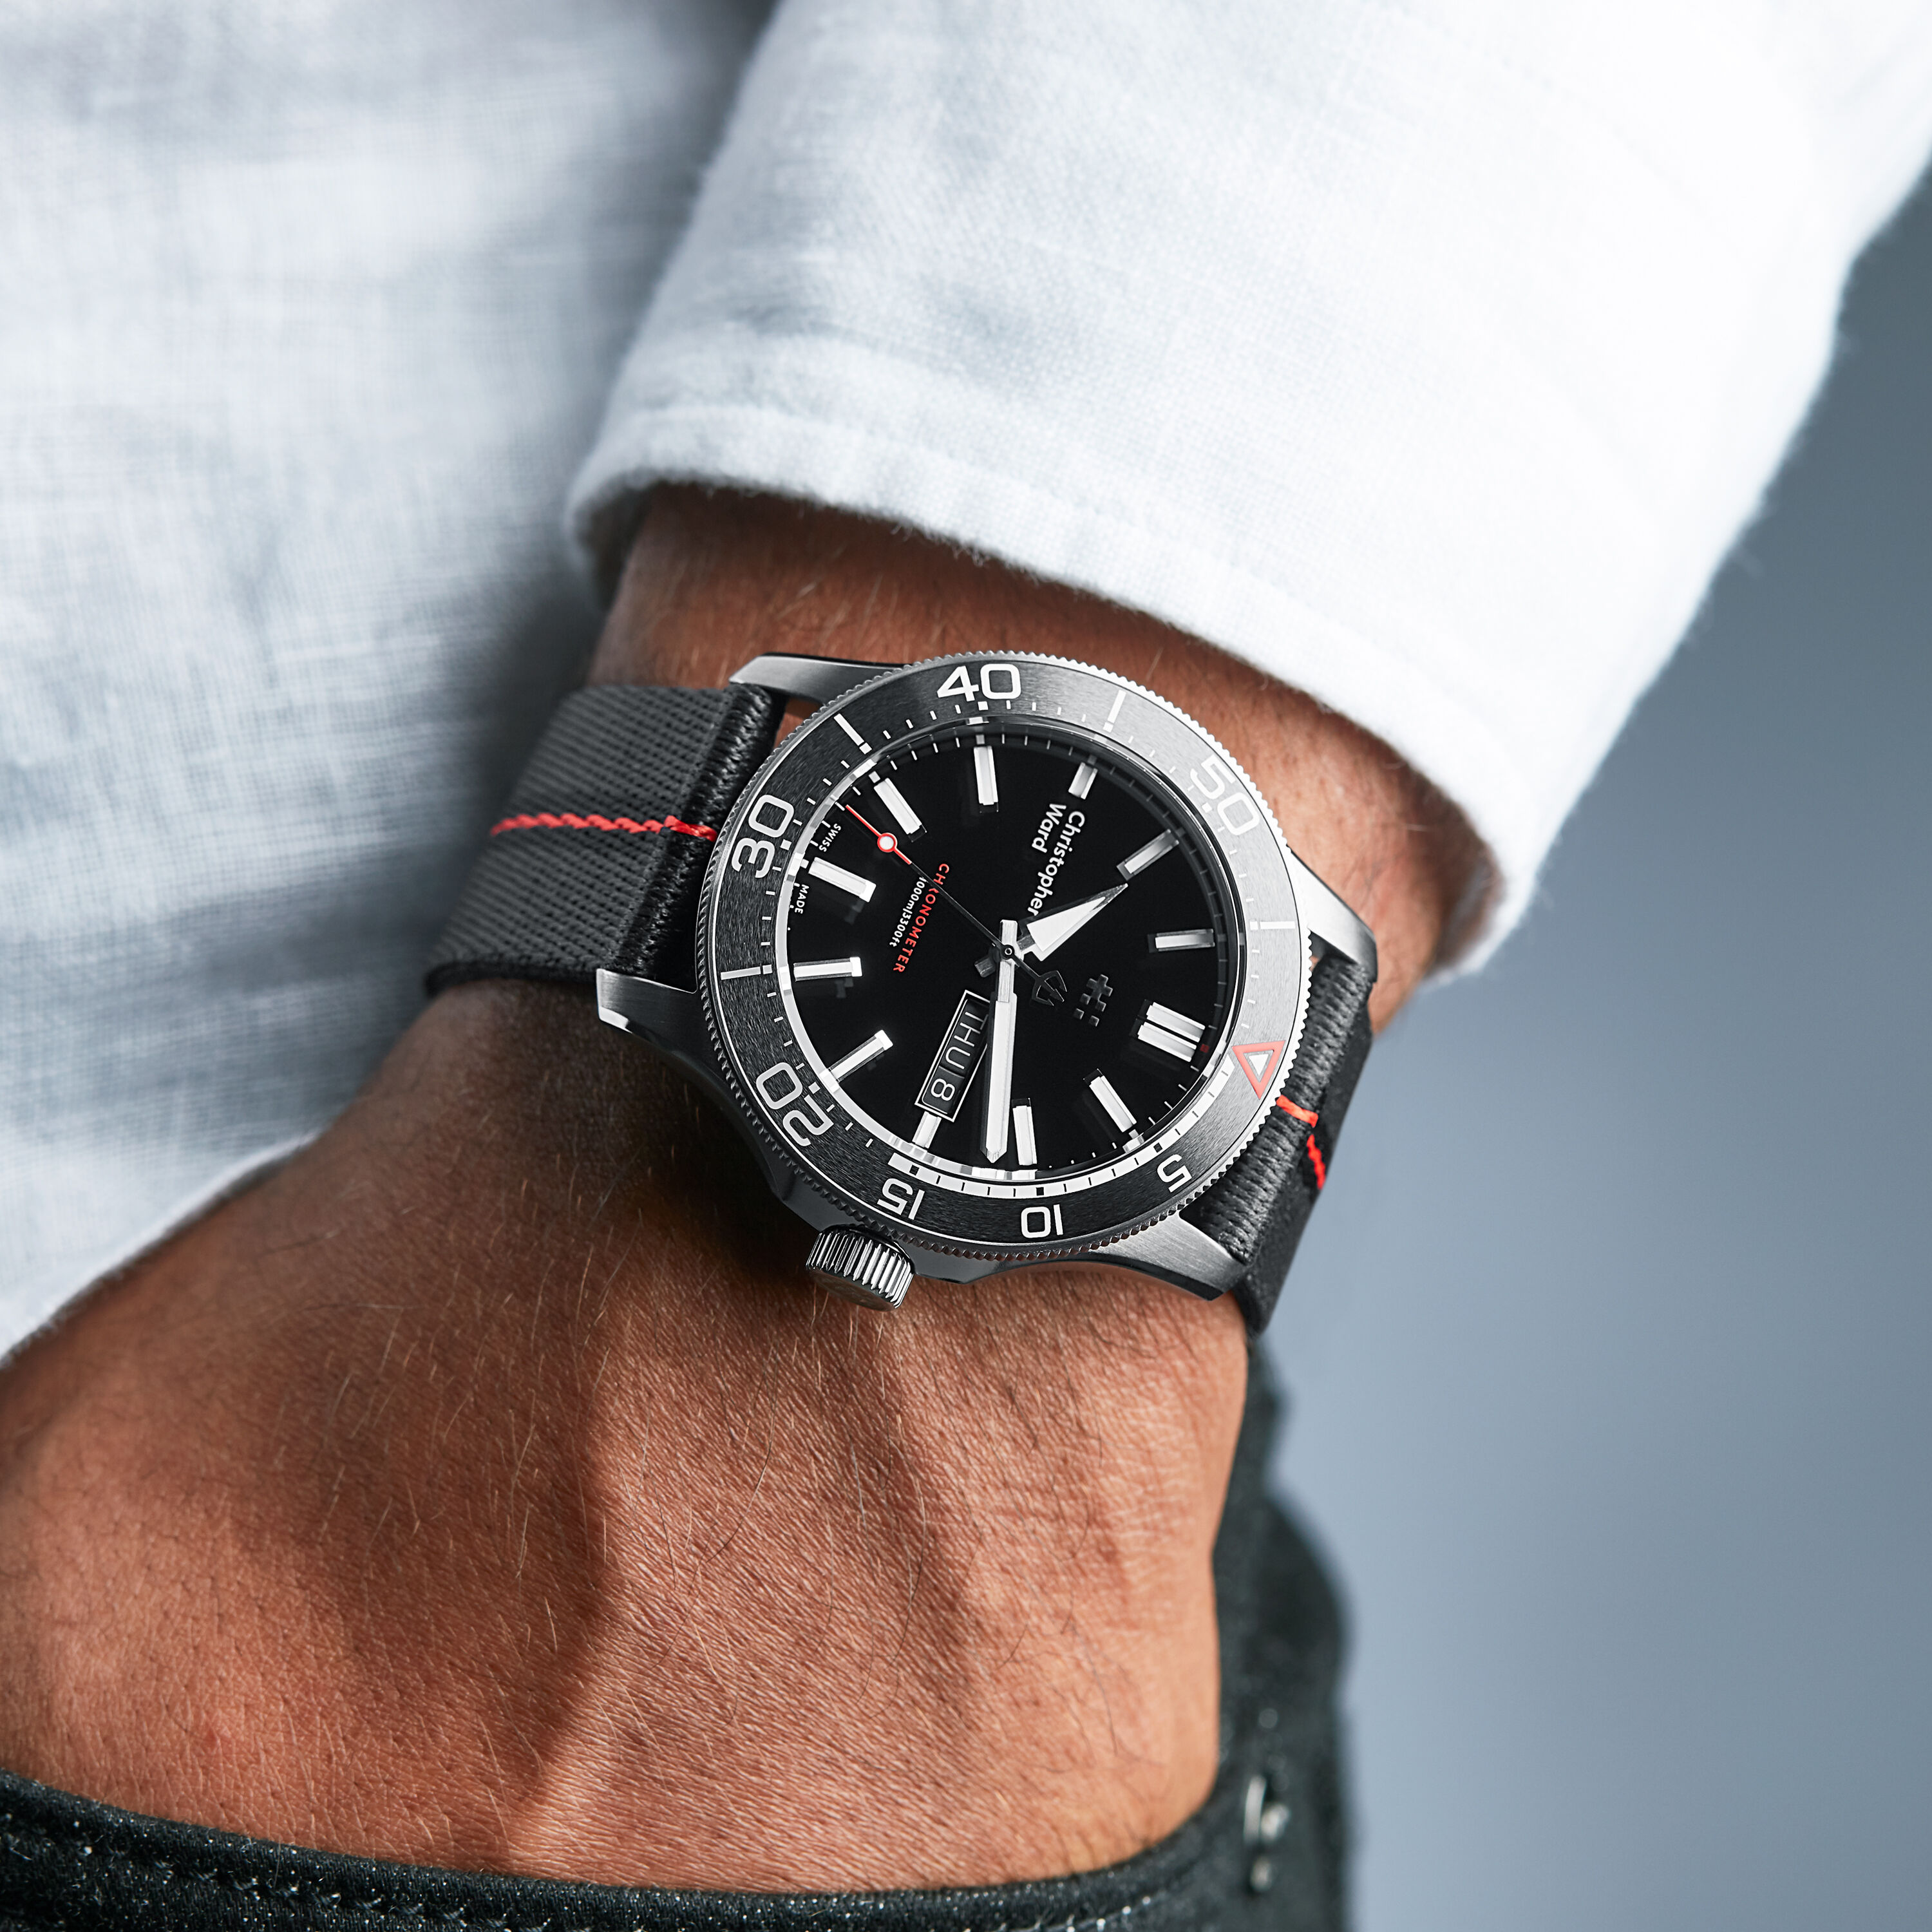 Christopher Ward C60 Trident GMT Watch Review | aBlogtoWatch